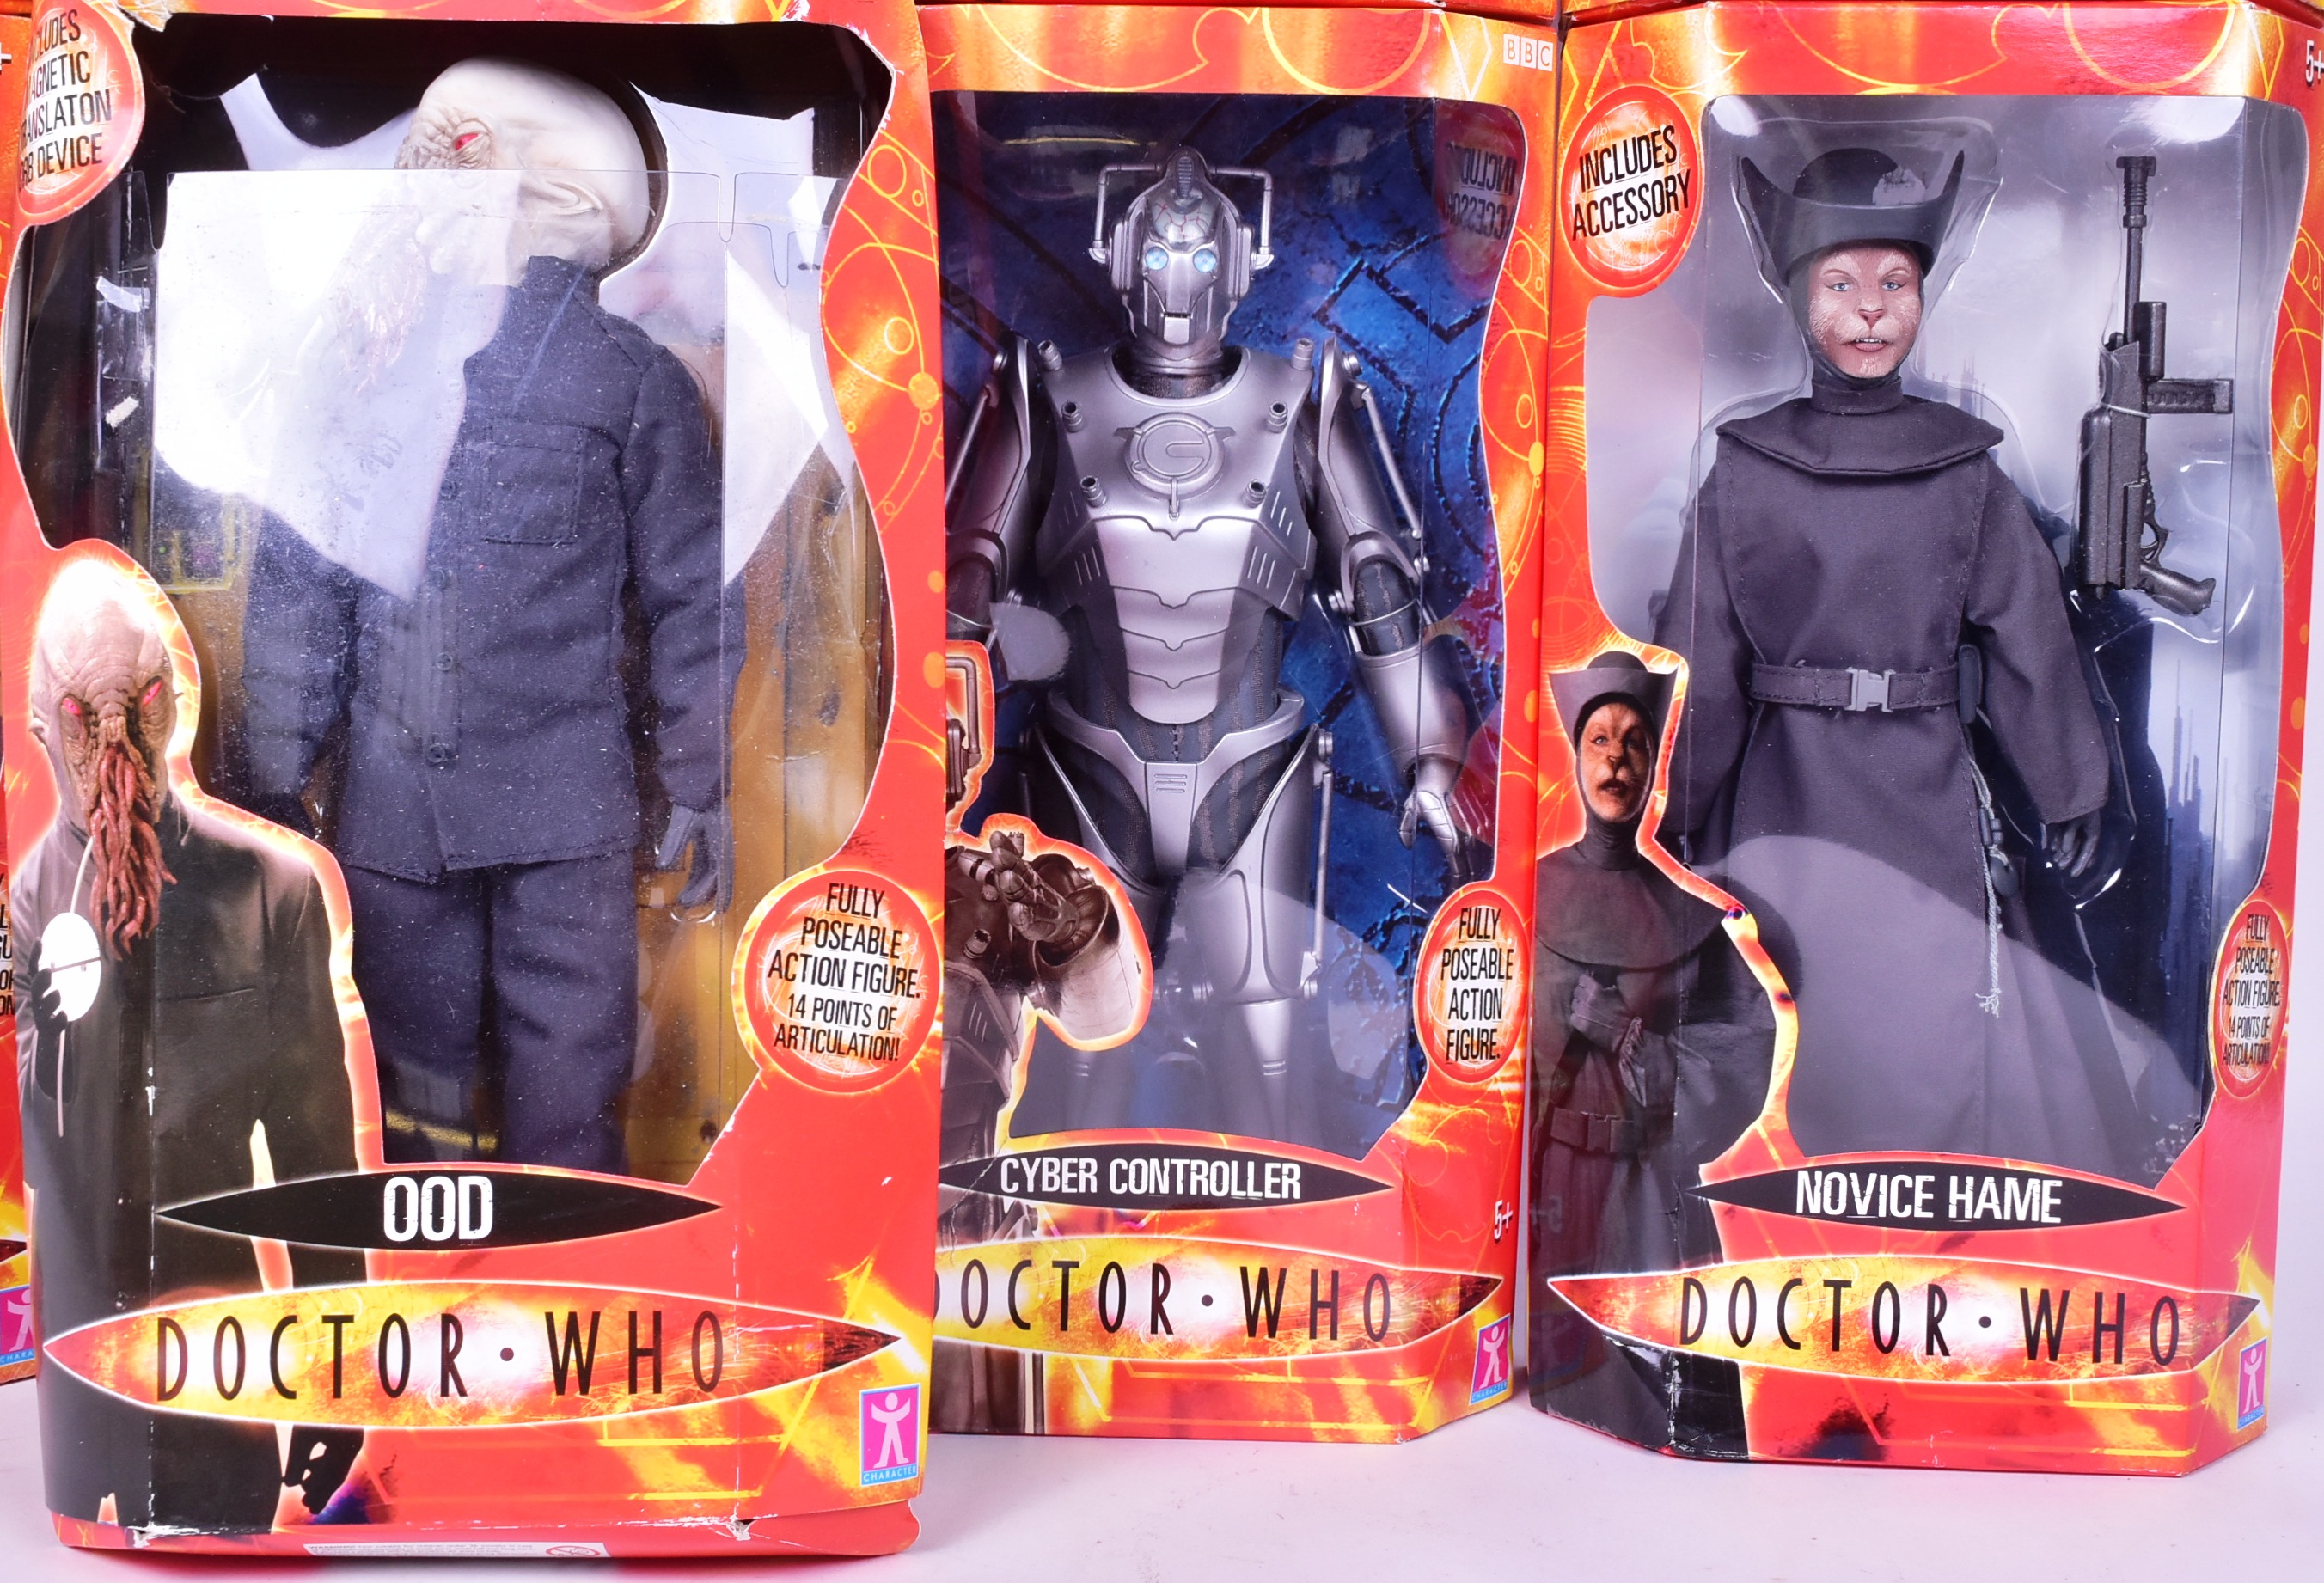 DOCTOR WHO - CHARACTER OPTIONS - 12" SCALE BOXED ACTION FIGURES - Image 2 of 5